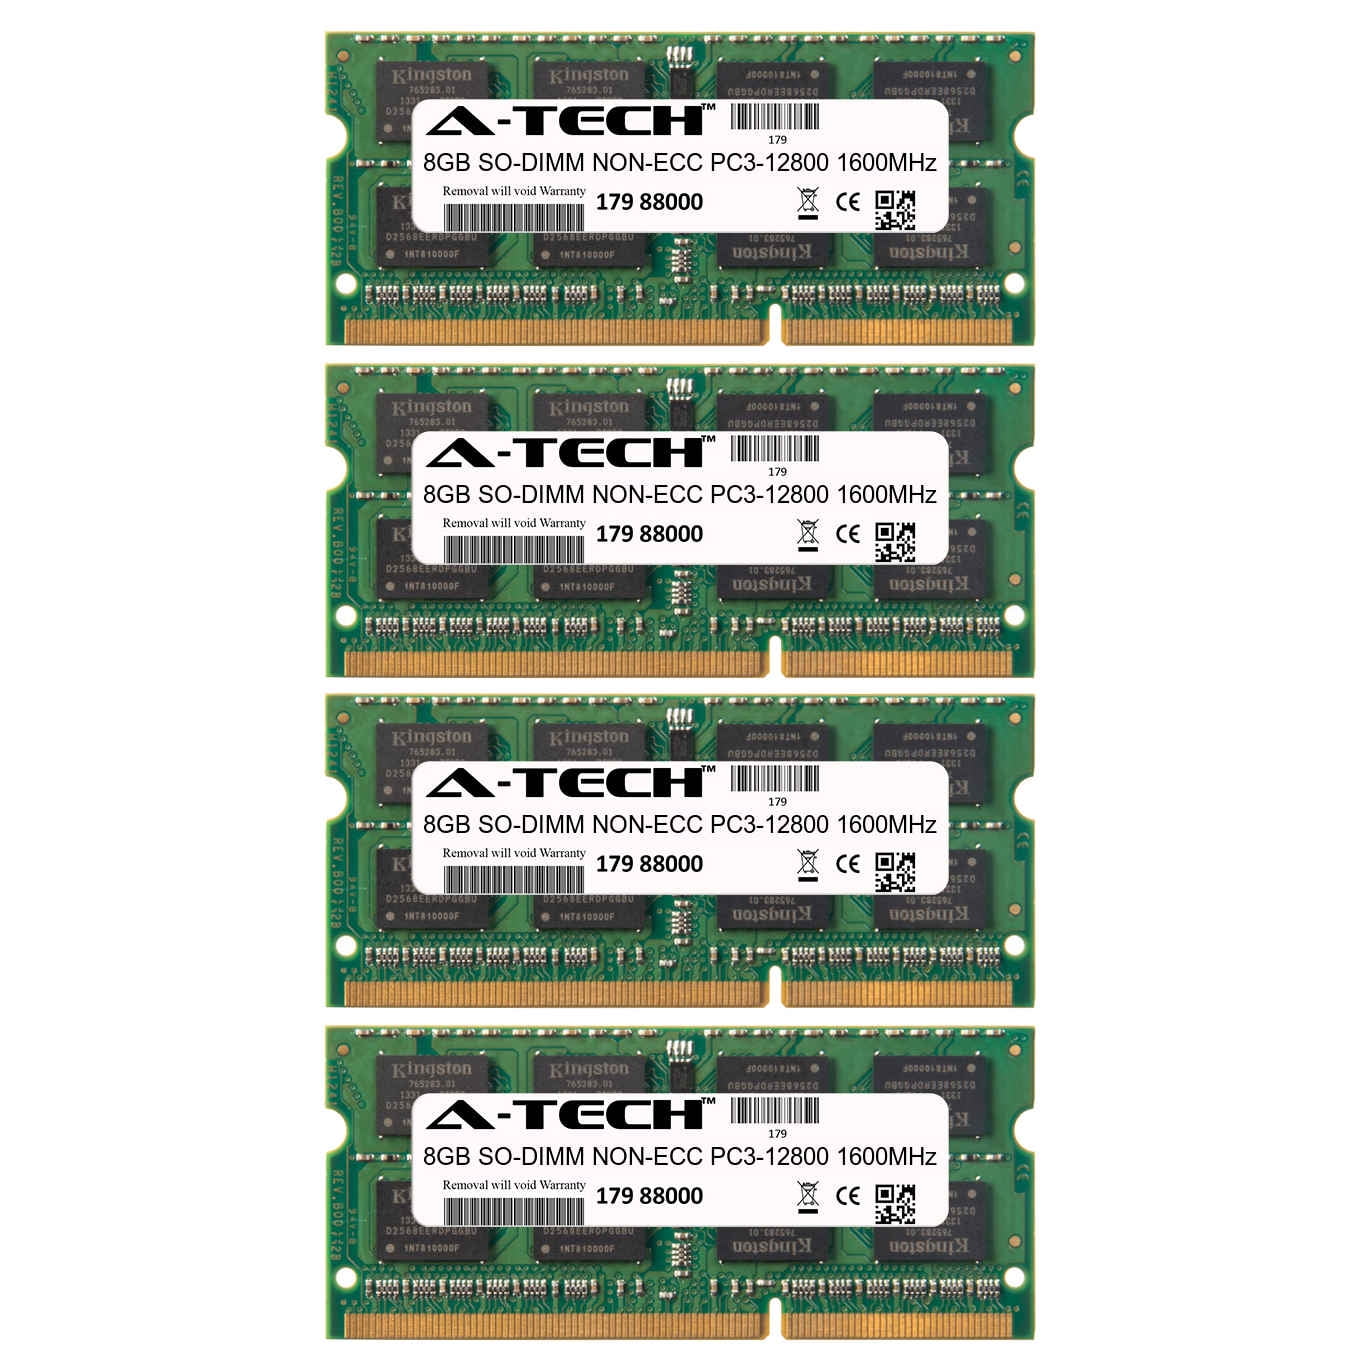 parts-quick 8GB Memory for Acer Aspire Z3-711 All-in-One DDR3L PC3L-12800 SODIMM Compatible RAM